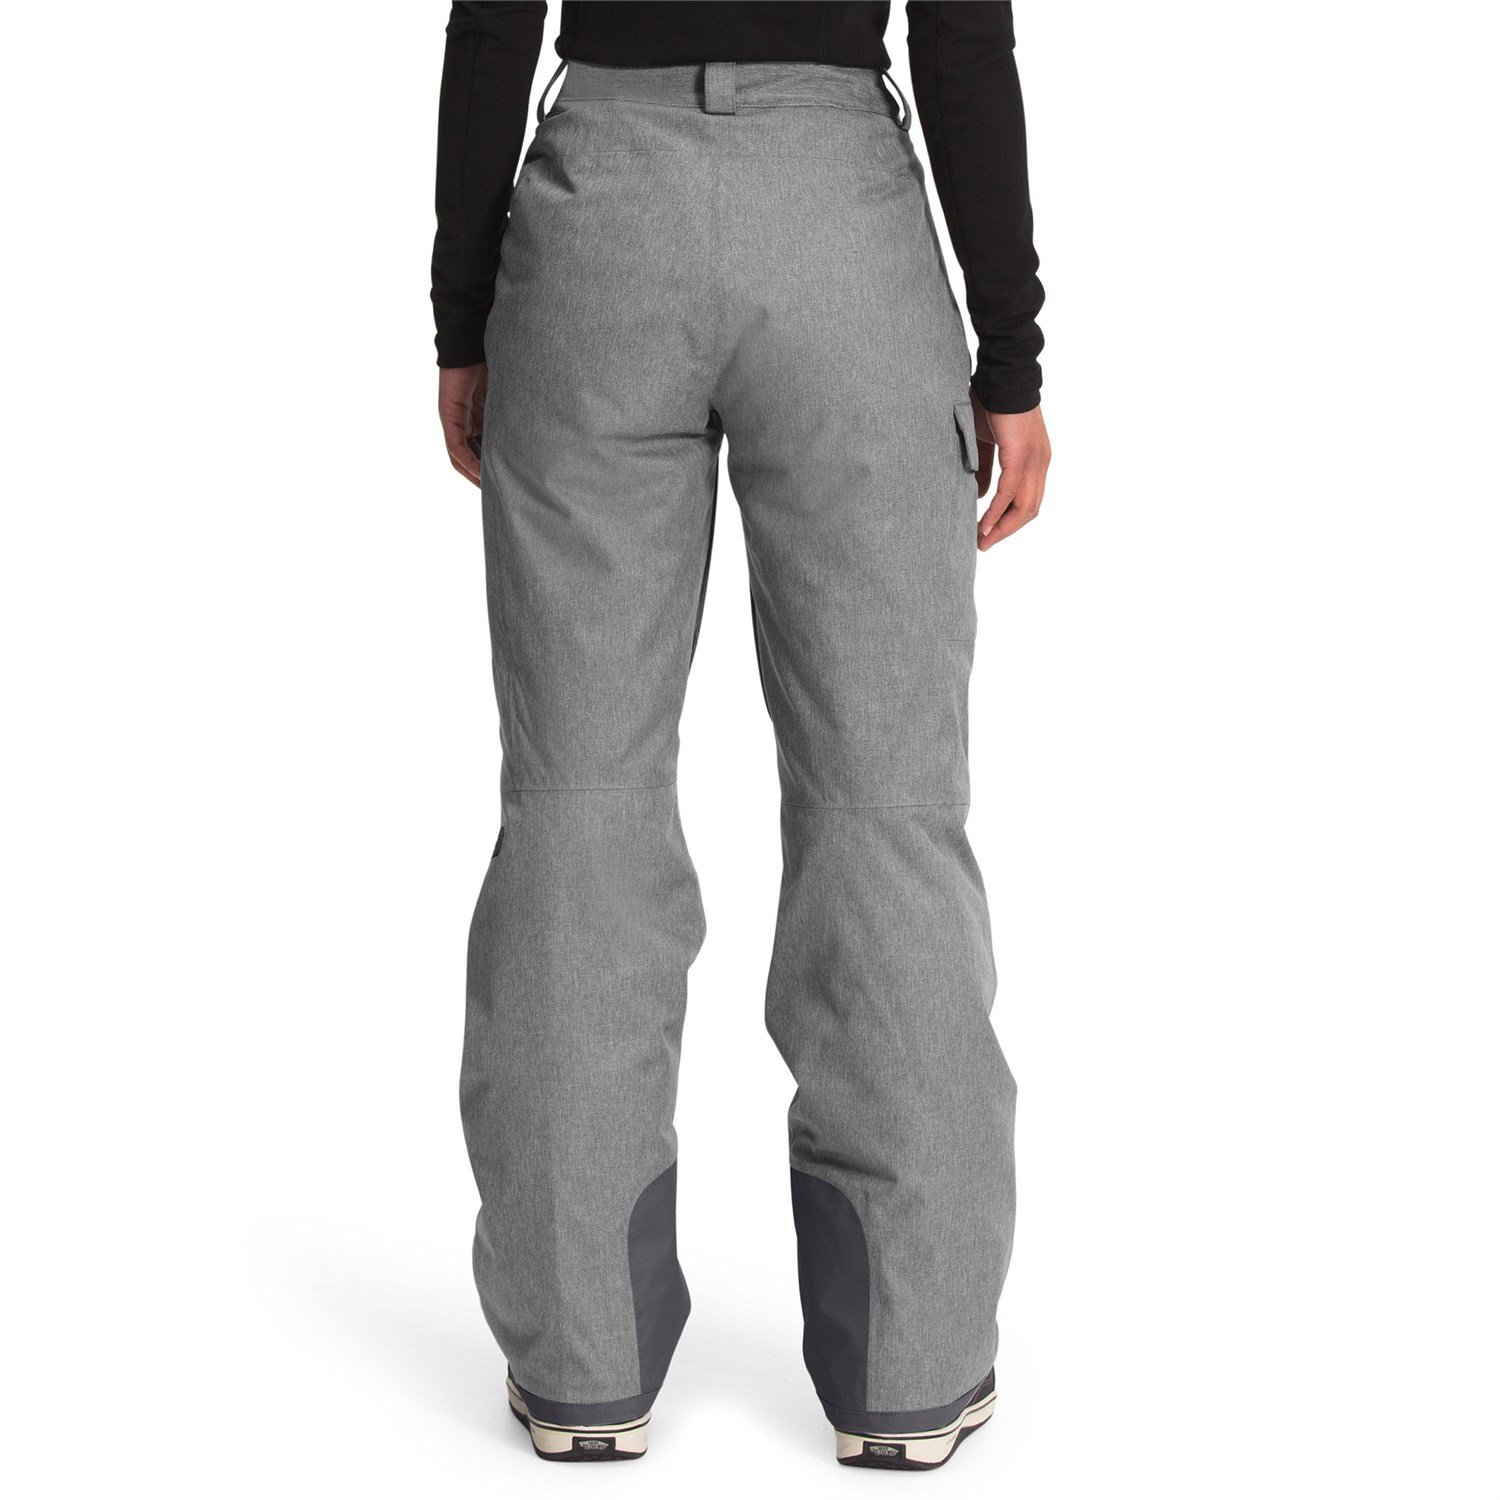 https://images.evo.com/imgp/zoom/203131/849498/the-north-face-freedom-insulated-short-pants-women-s-.jpg